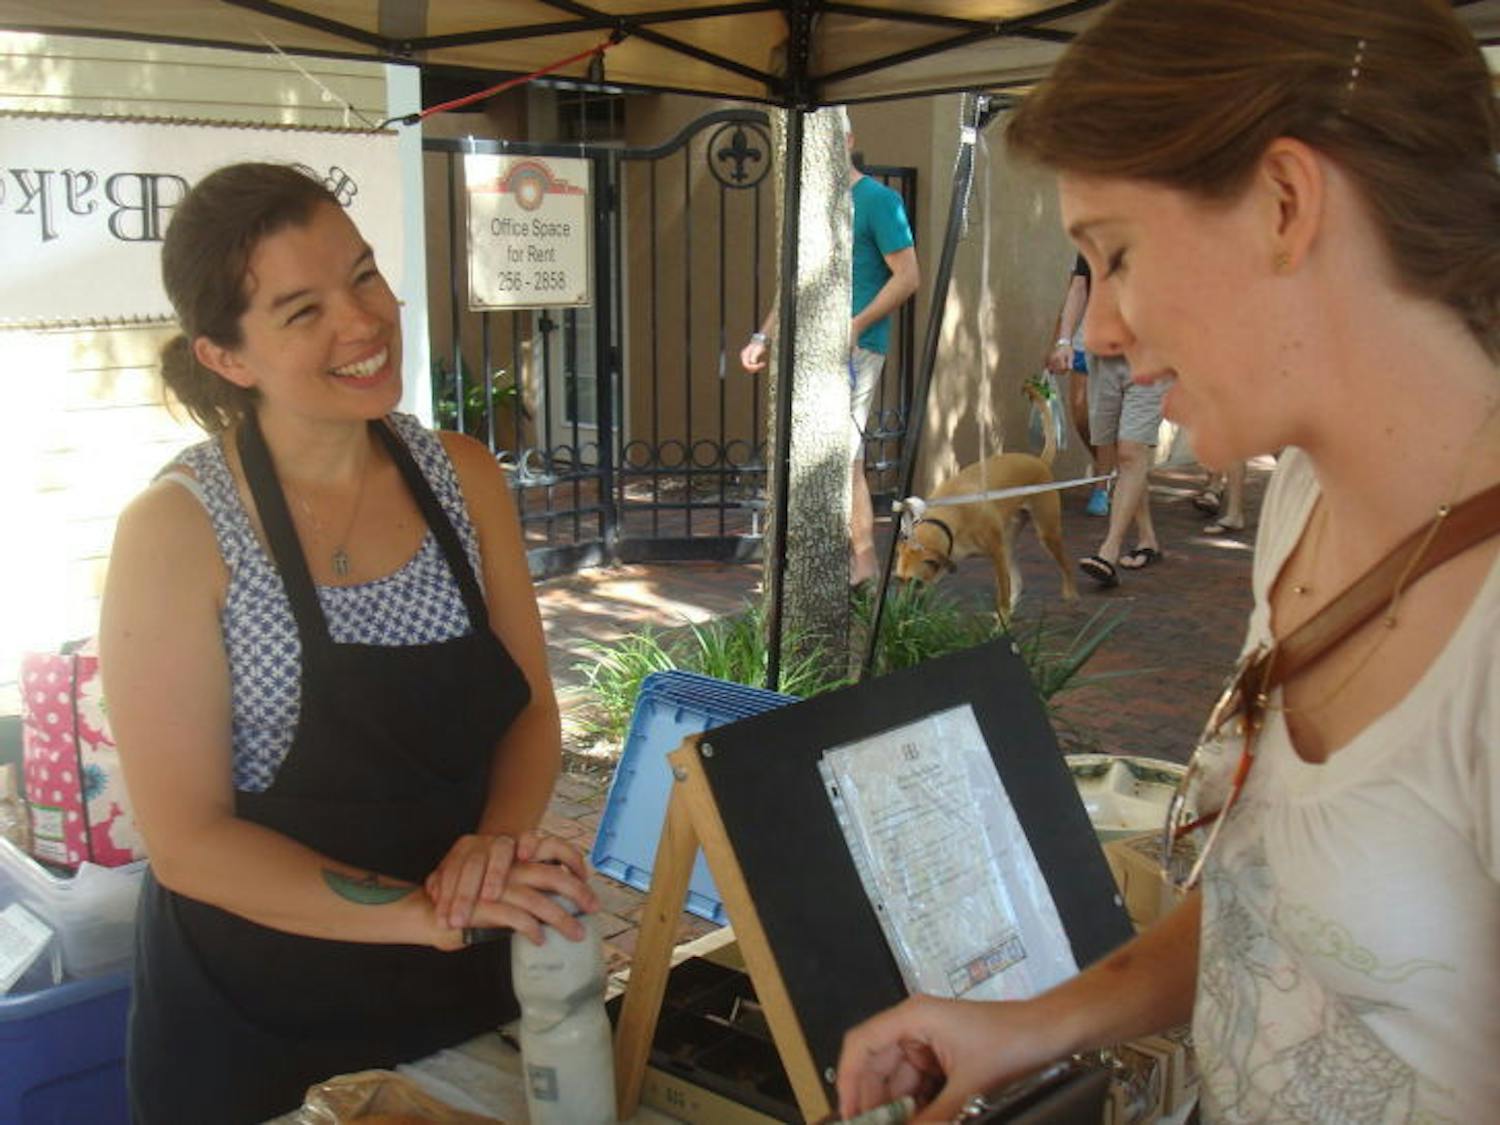 Erin Carlson, 22, stops at Amanda Bowers’ table of goods from her bakeshop BakerBaker for a pecan bar. Carlson was meandering through Haile Farmers Market that winds through Haile Village Saturday.